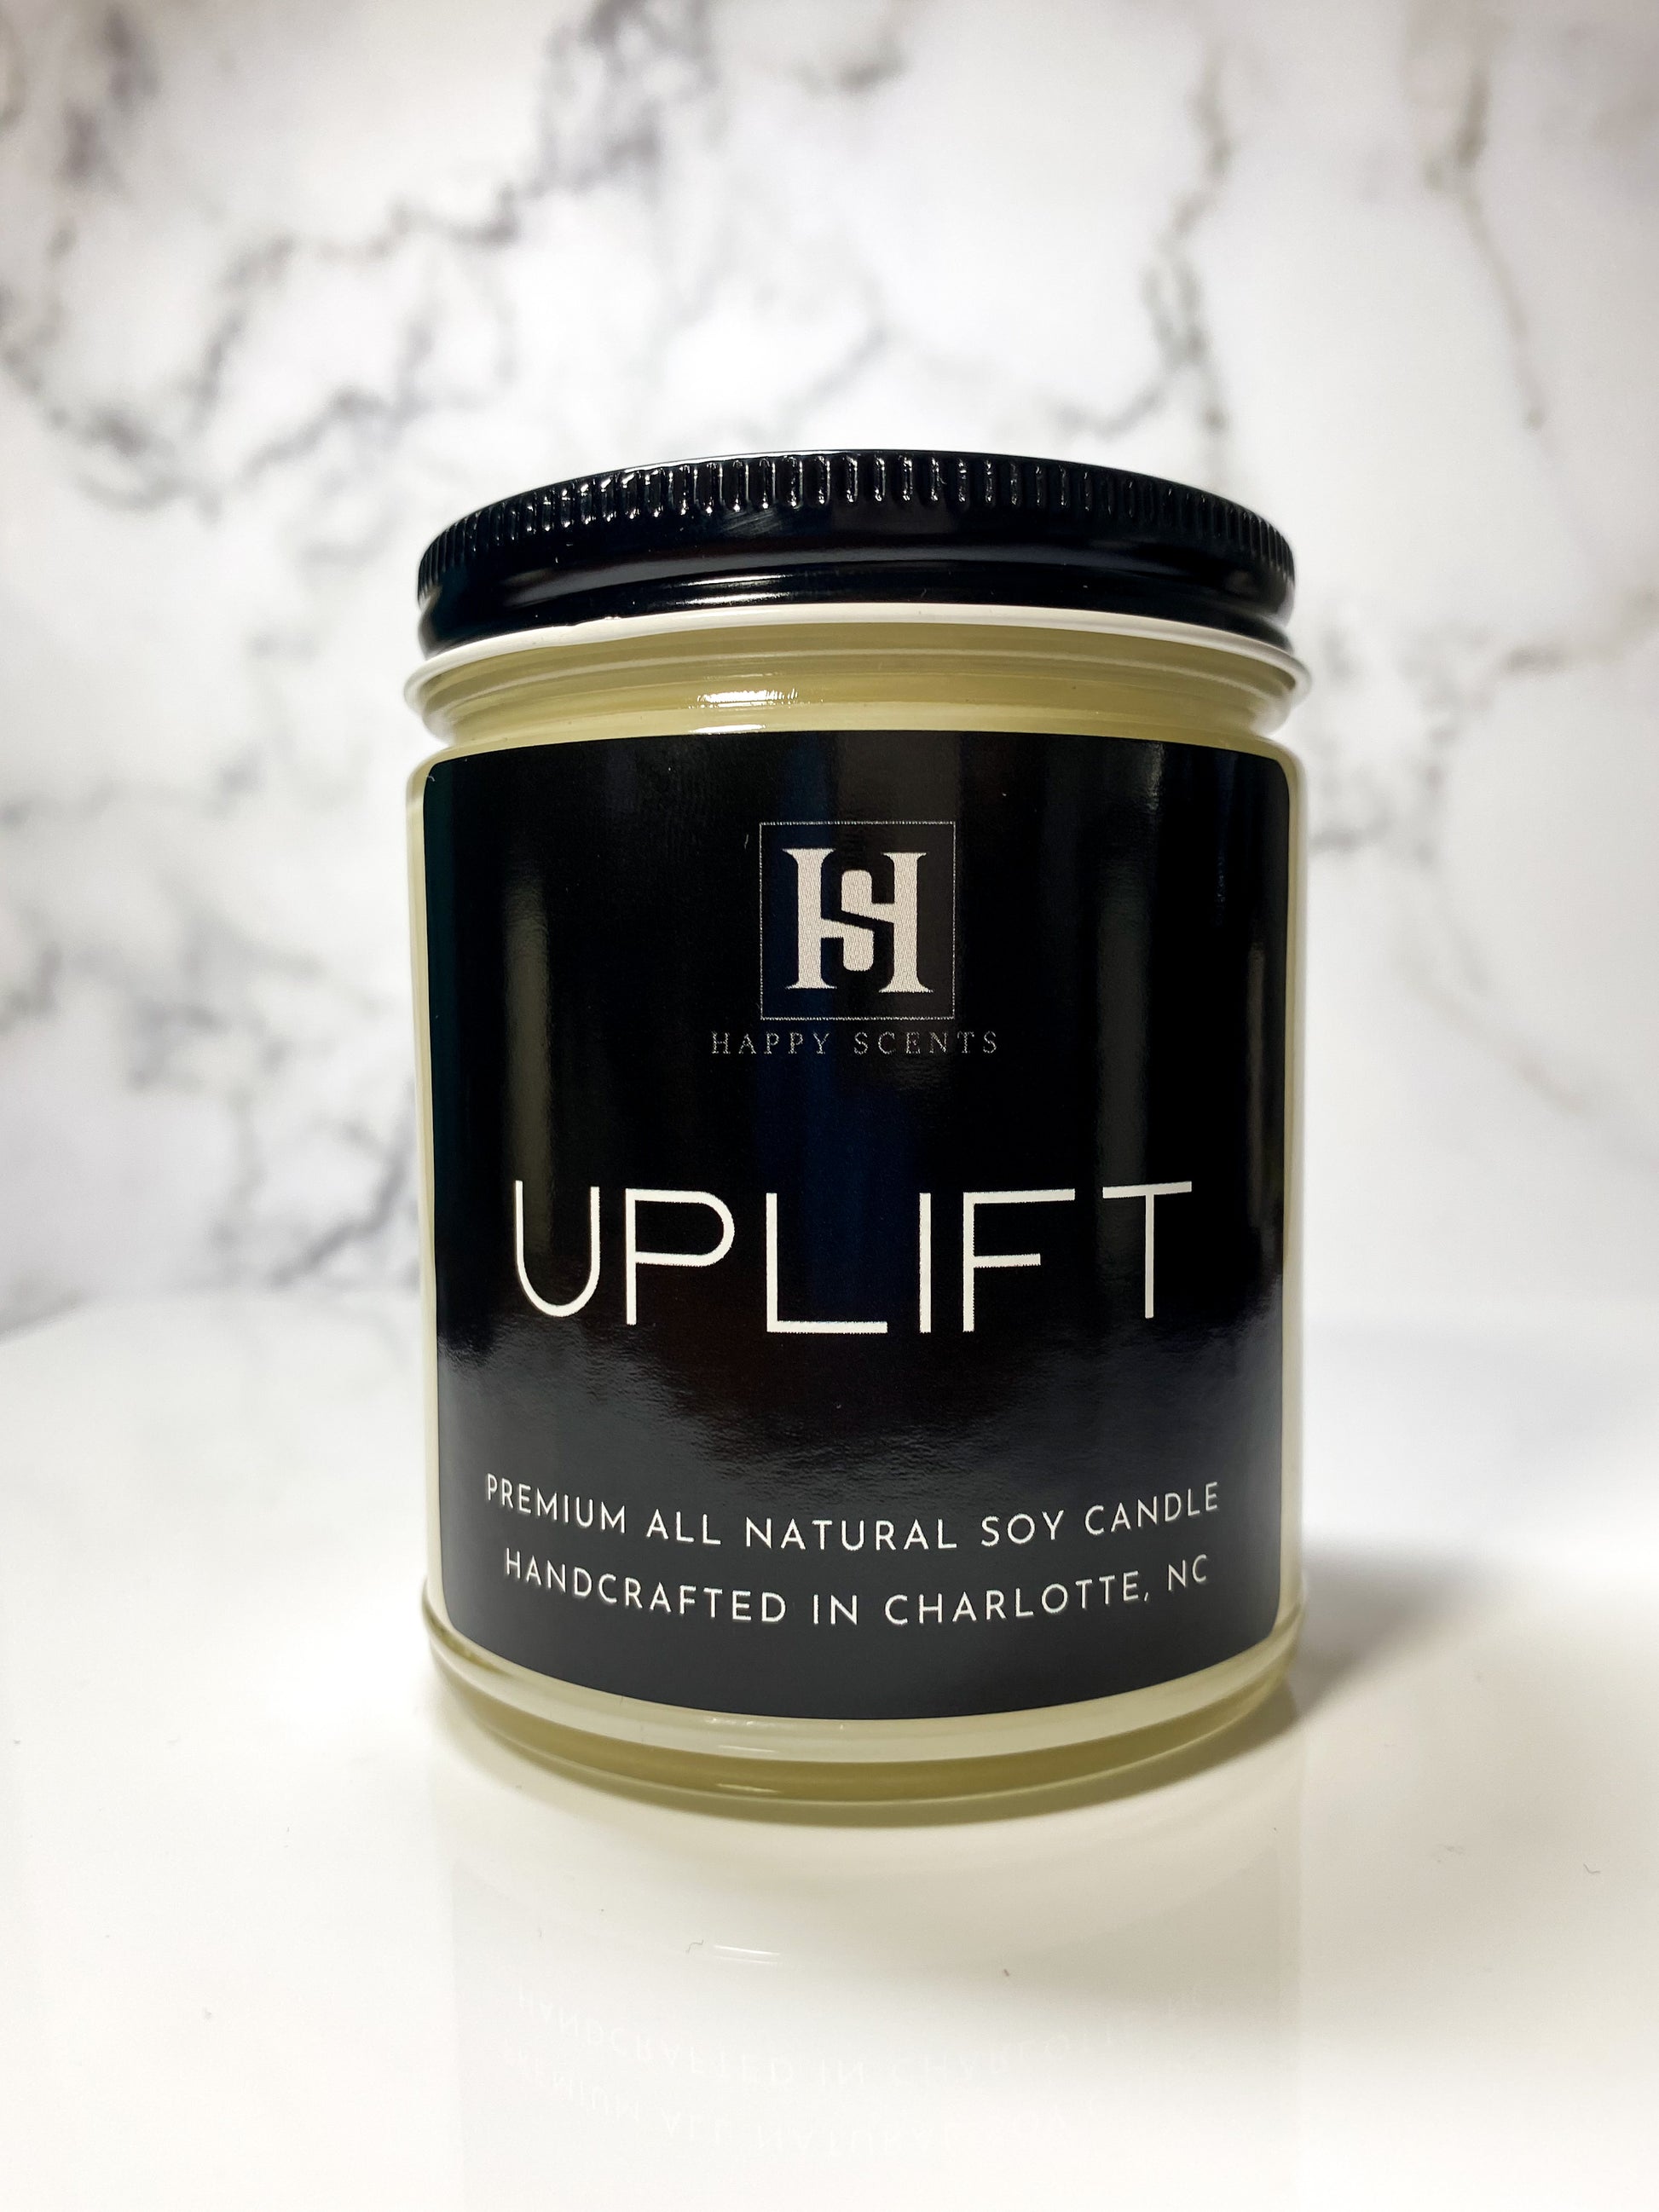 Uplift candle by Happy Scents. Black Label collection.